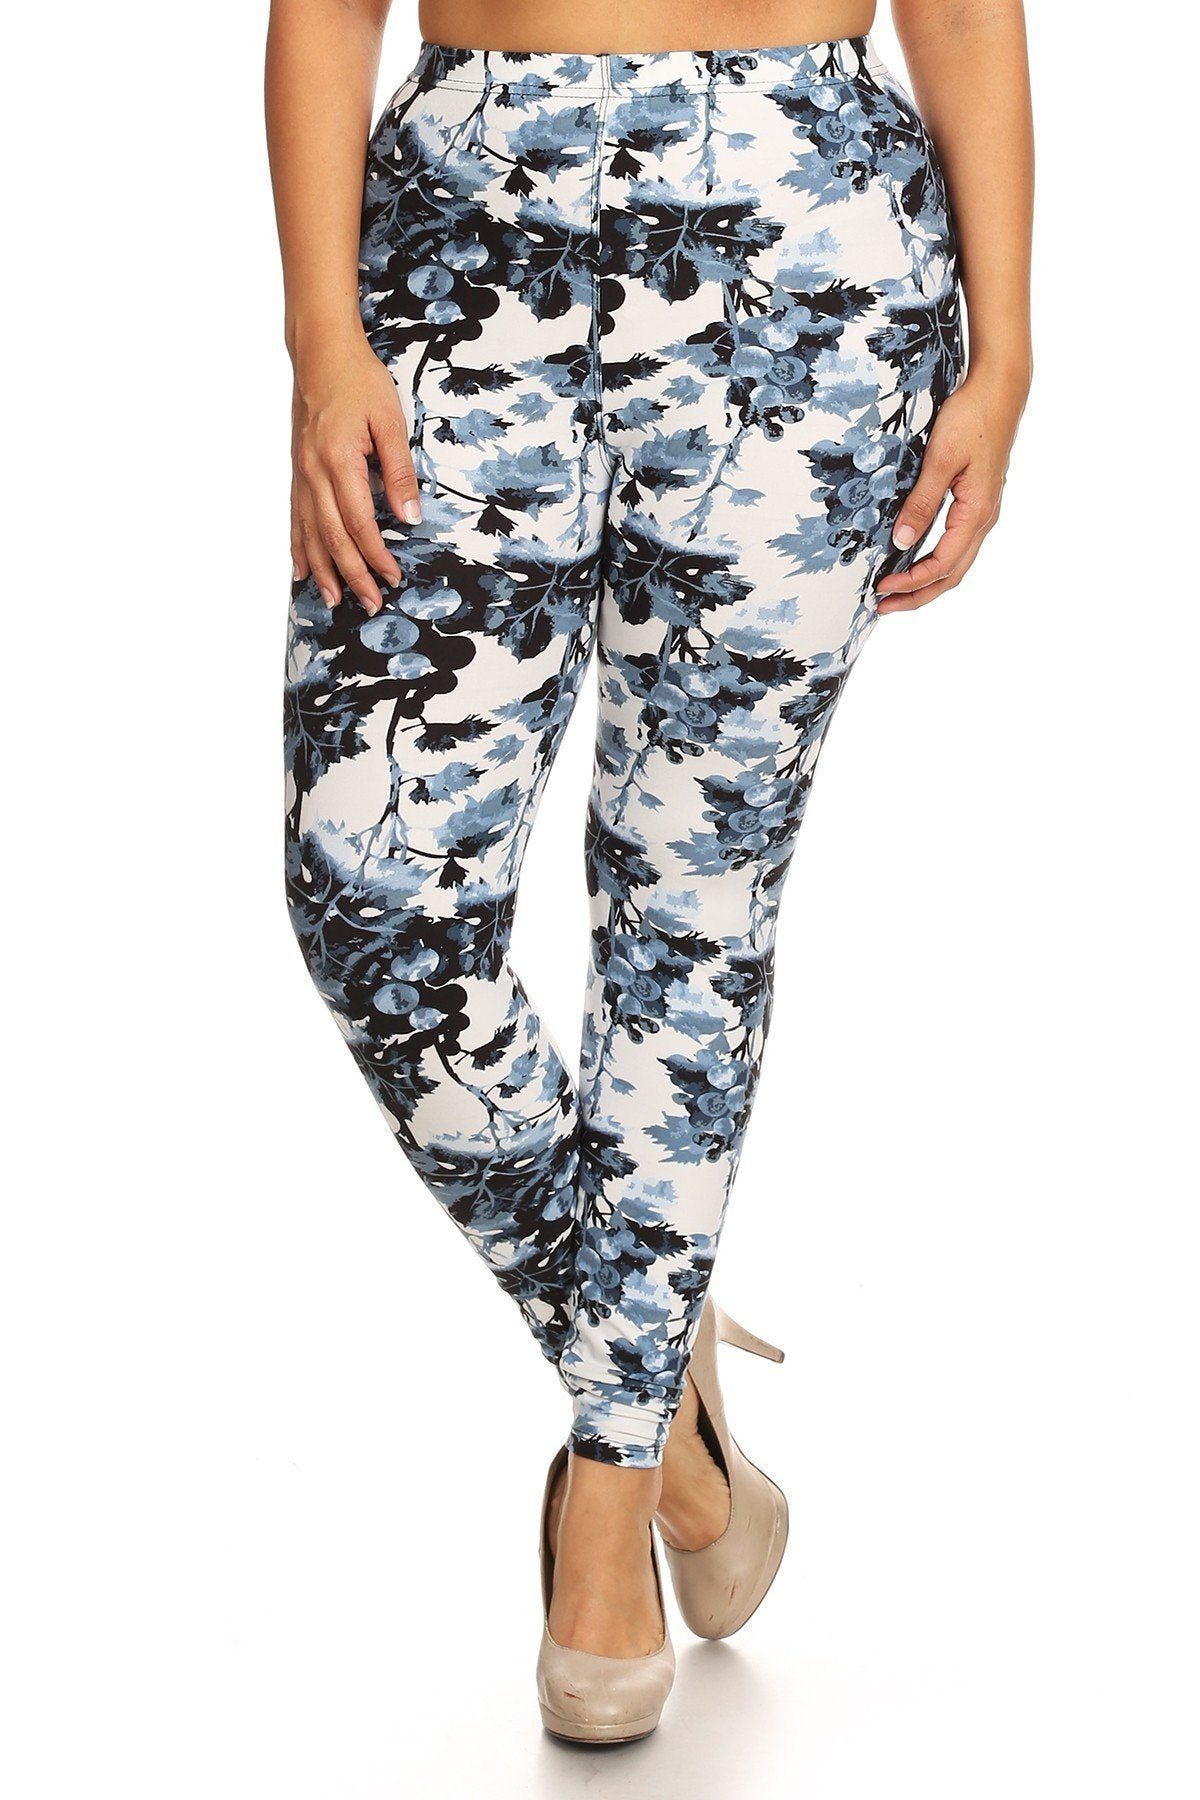 Plus Size Floral Print, Full Length Leggings In A Slim Fitting Style With A Banded High Waist